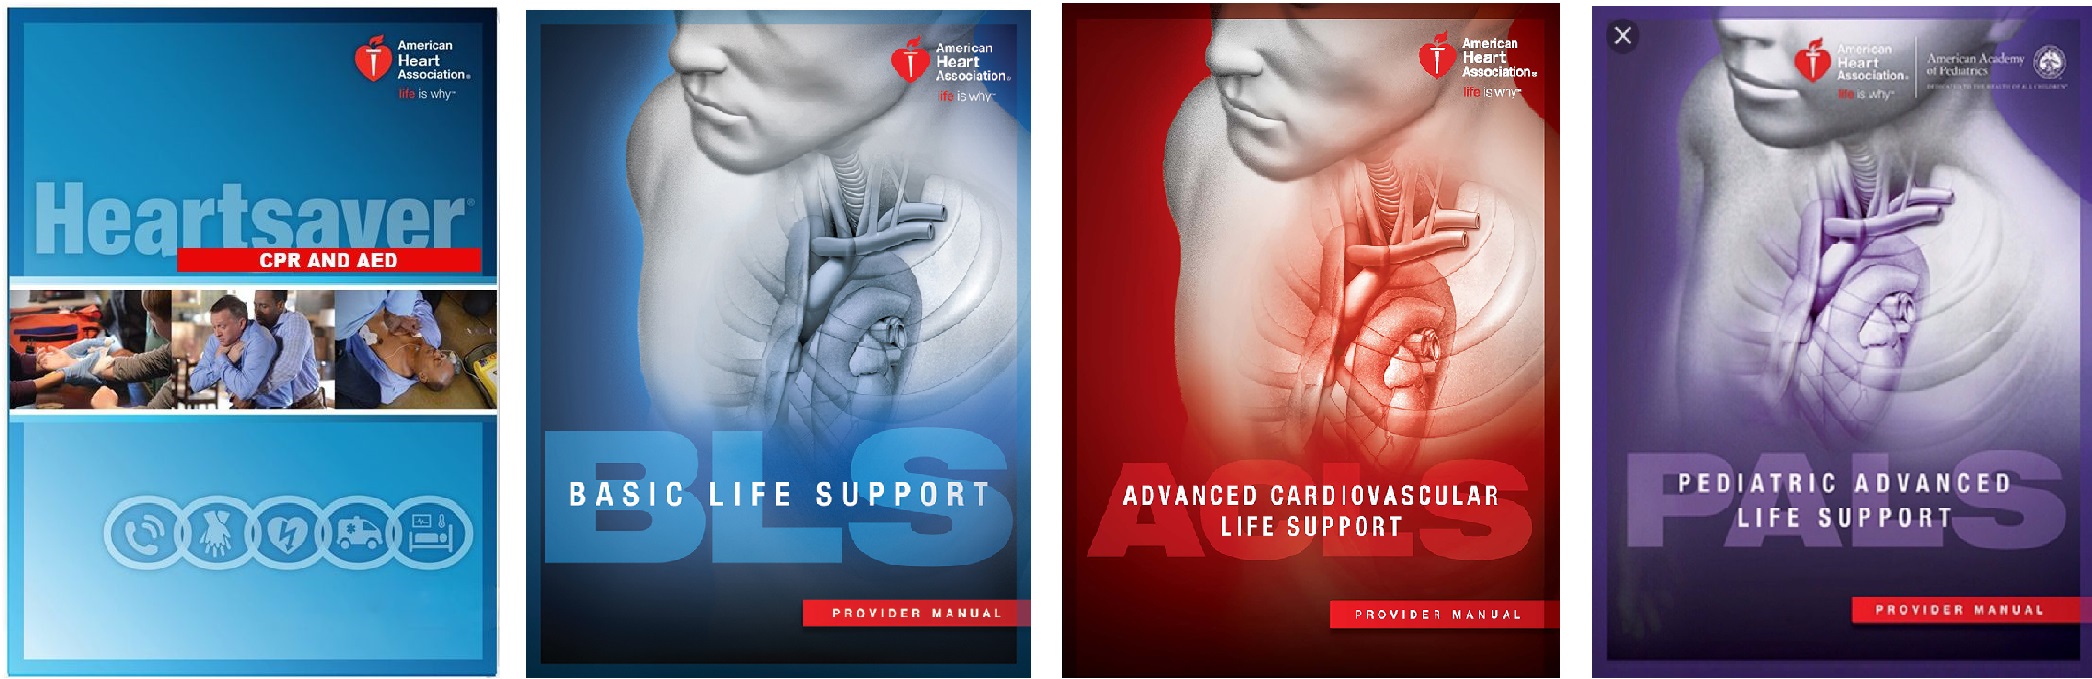 Cover images of the American Heart Associations Provider Manuals.